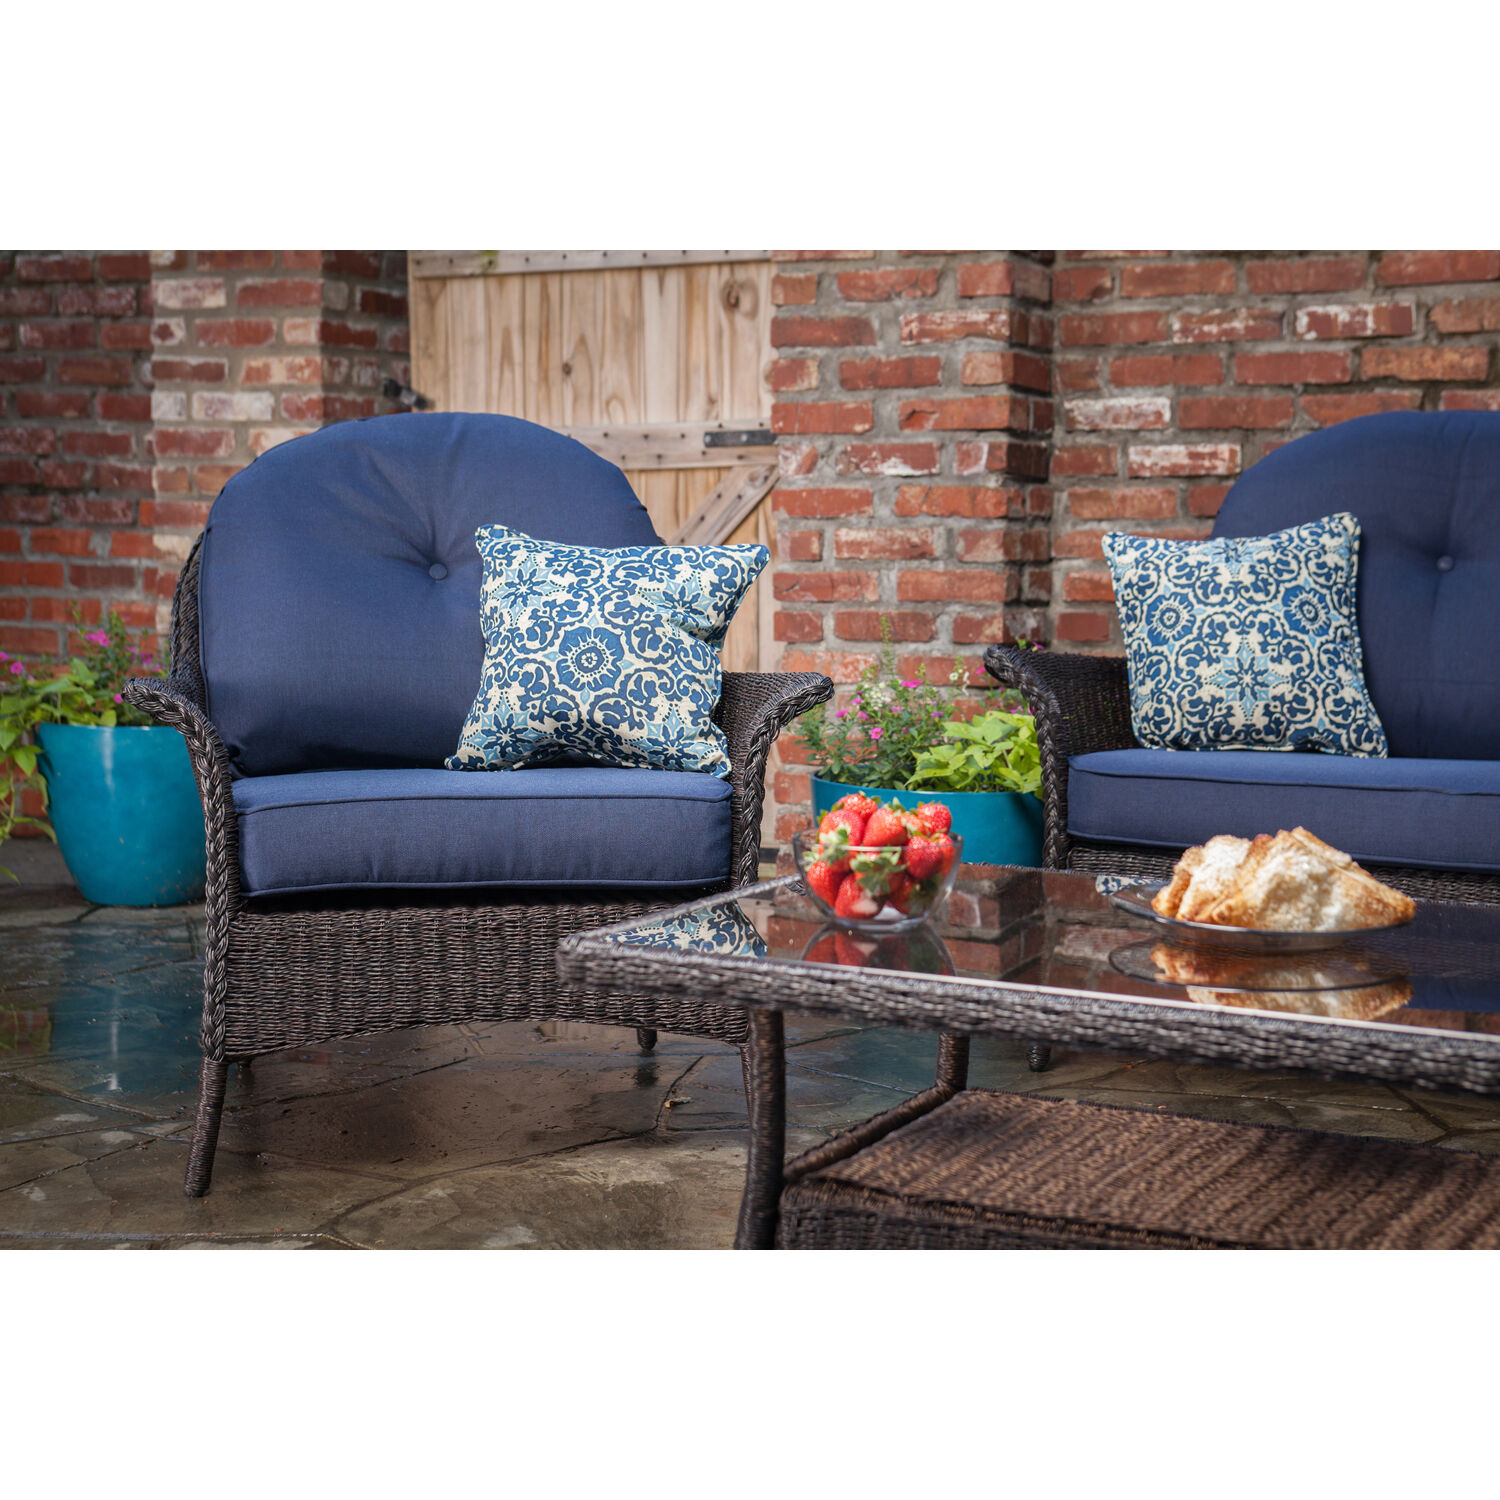 Hanover Sun Porch 6-Pc. Resin Lounge Set w/ Handwoven Loveseat, 2 Armchairs, 2 Ottomans, Coffee Table and Plush Navy Blue Cushions - image 2 of 14